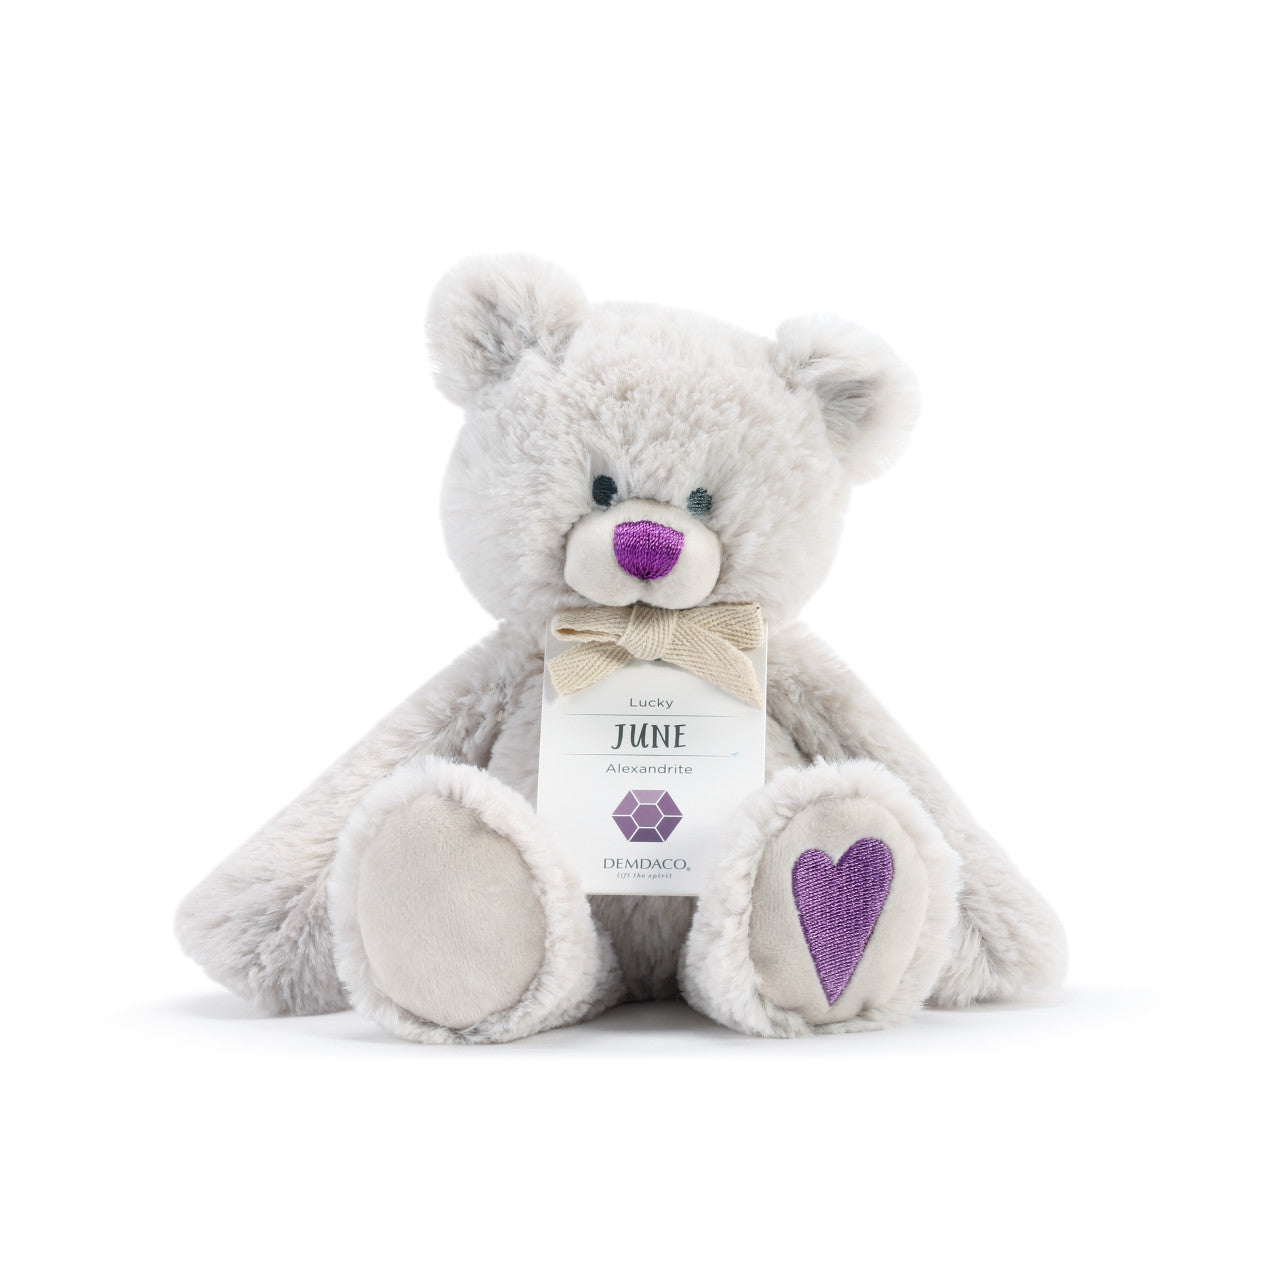 Demdaco June Birthstone Bear available at The Good Life Boutique